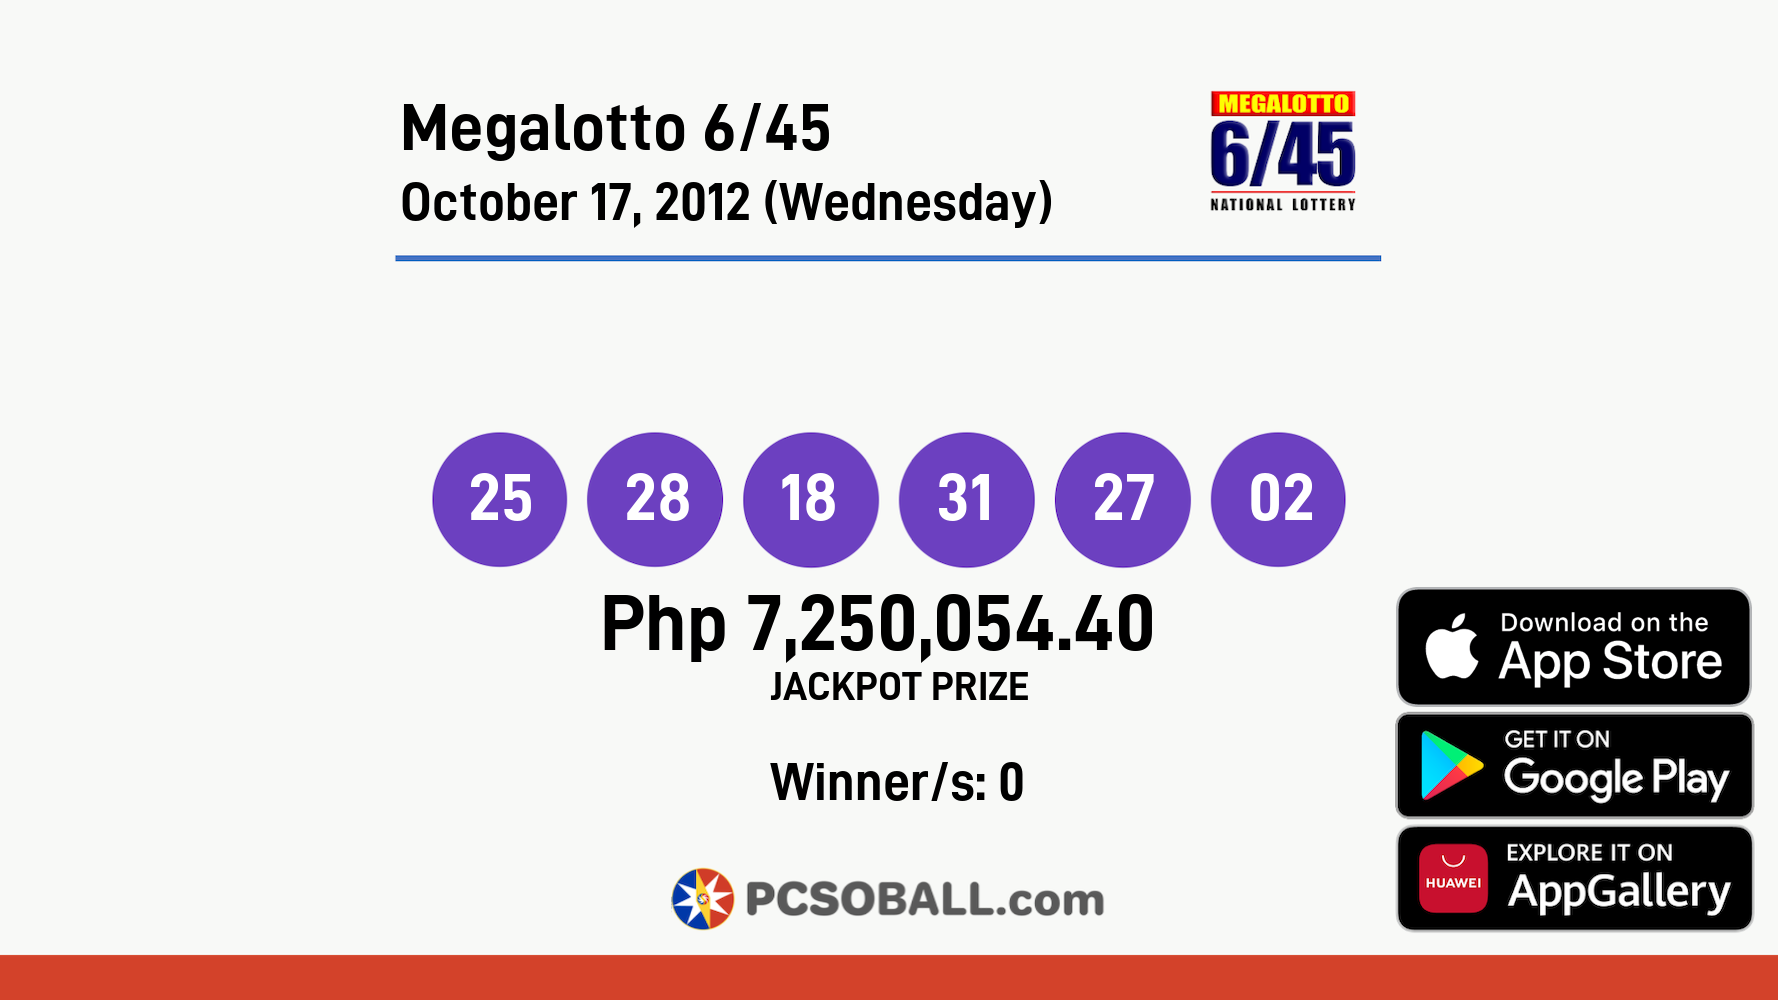 Megalotto 6/45 October 17, 2012 (Wednesday) Result